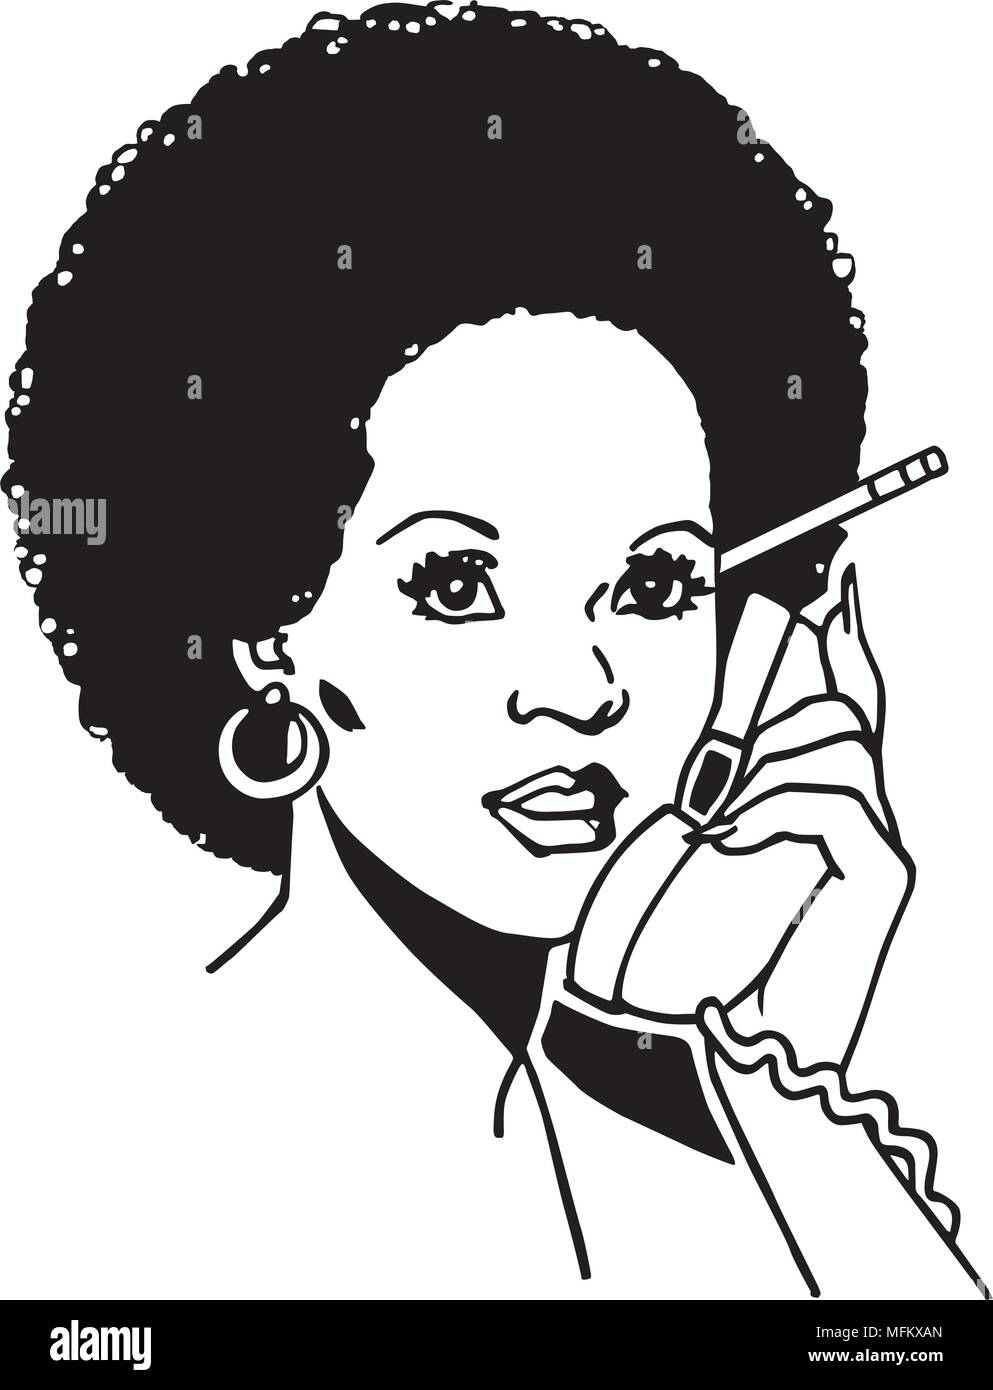 Lady On The Phone 2 - Retro Clipart Illustration Stock Vector